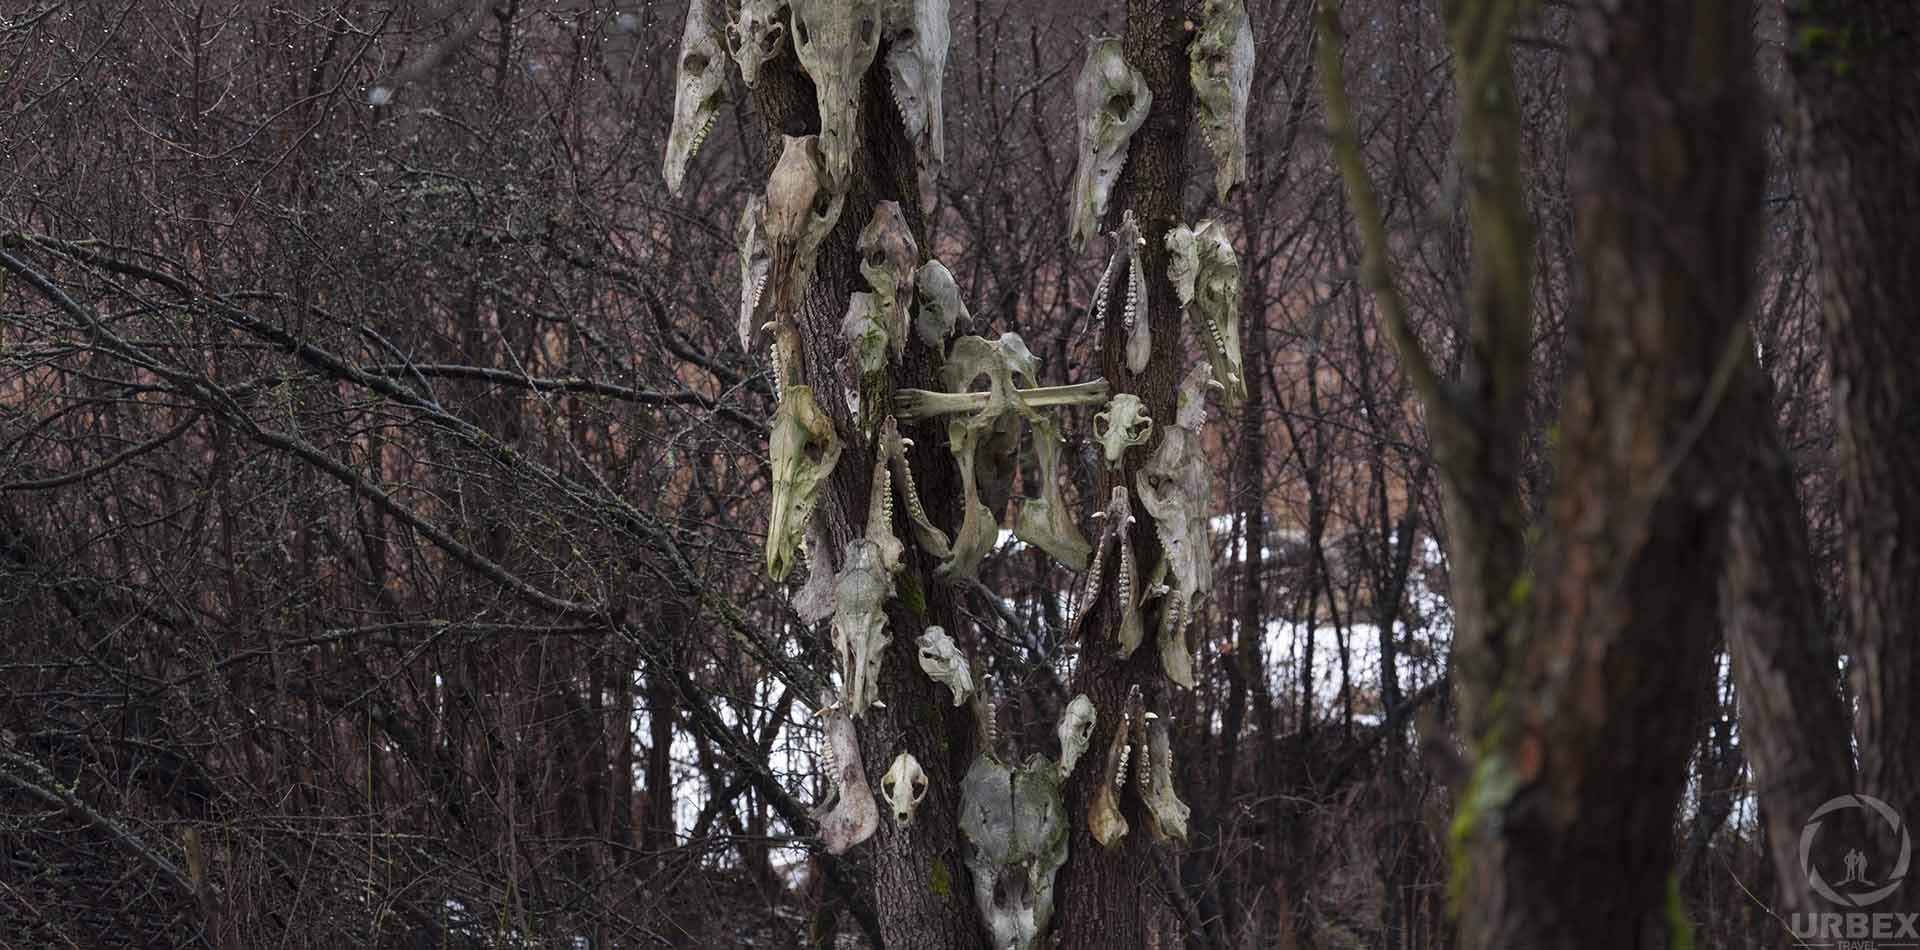 Abandoned animal totem in the forest